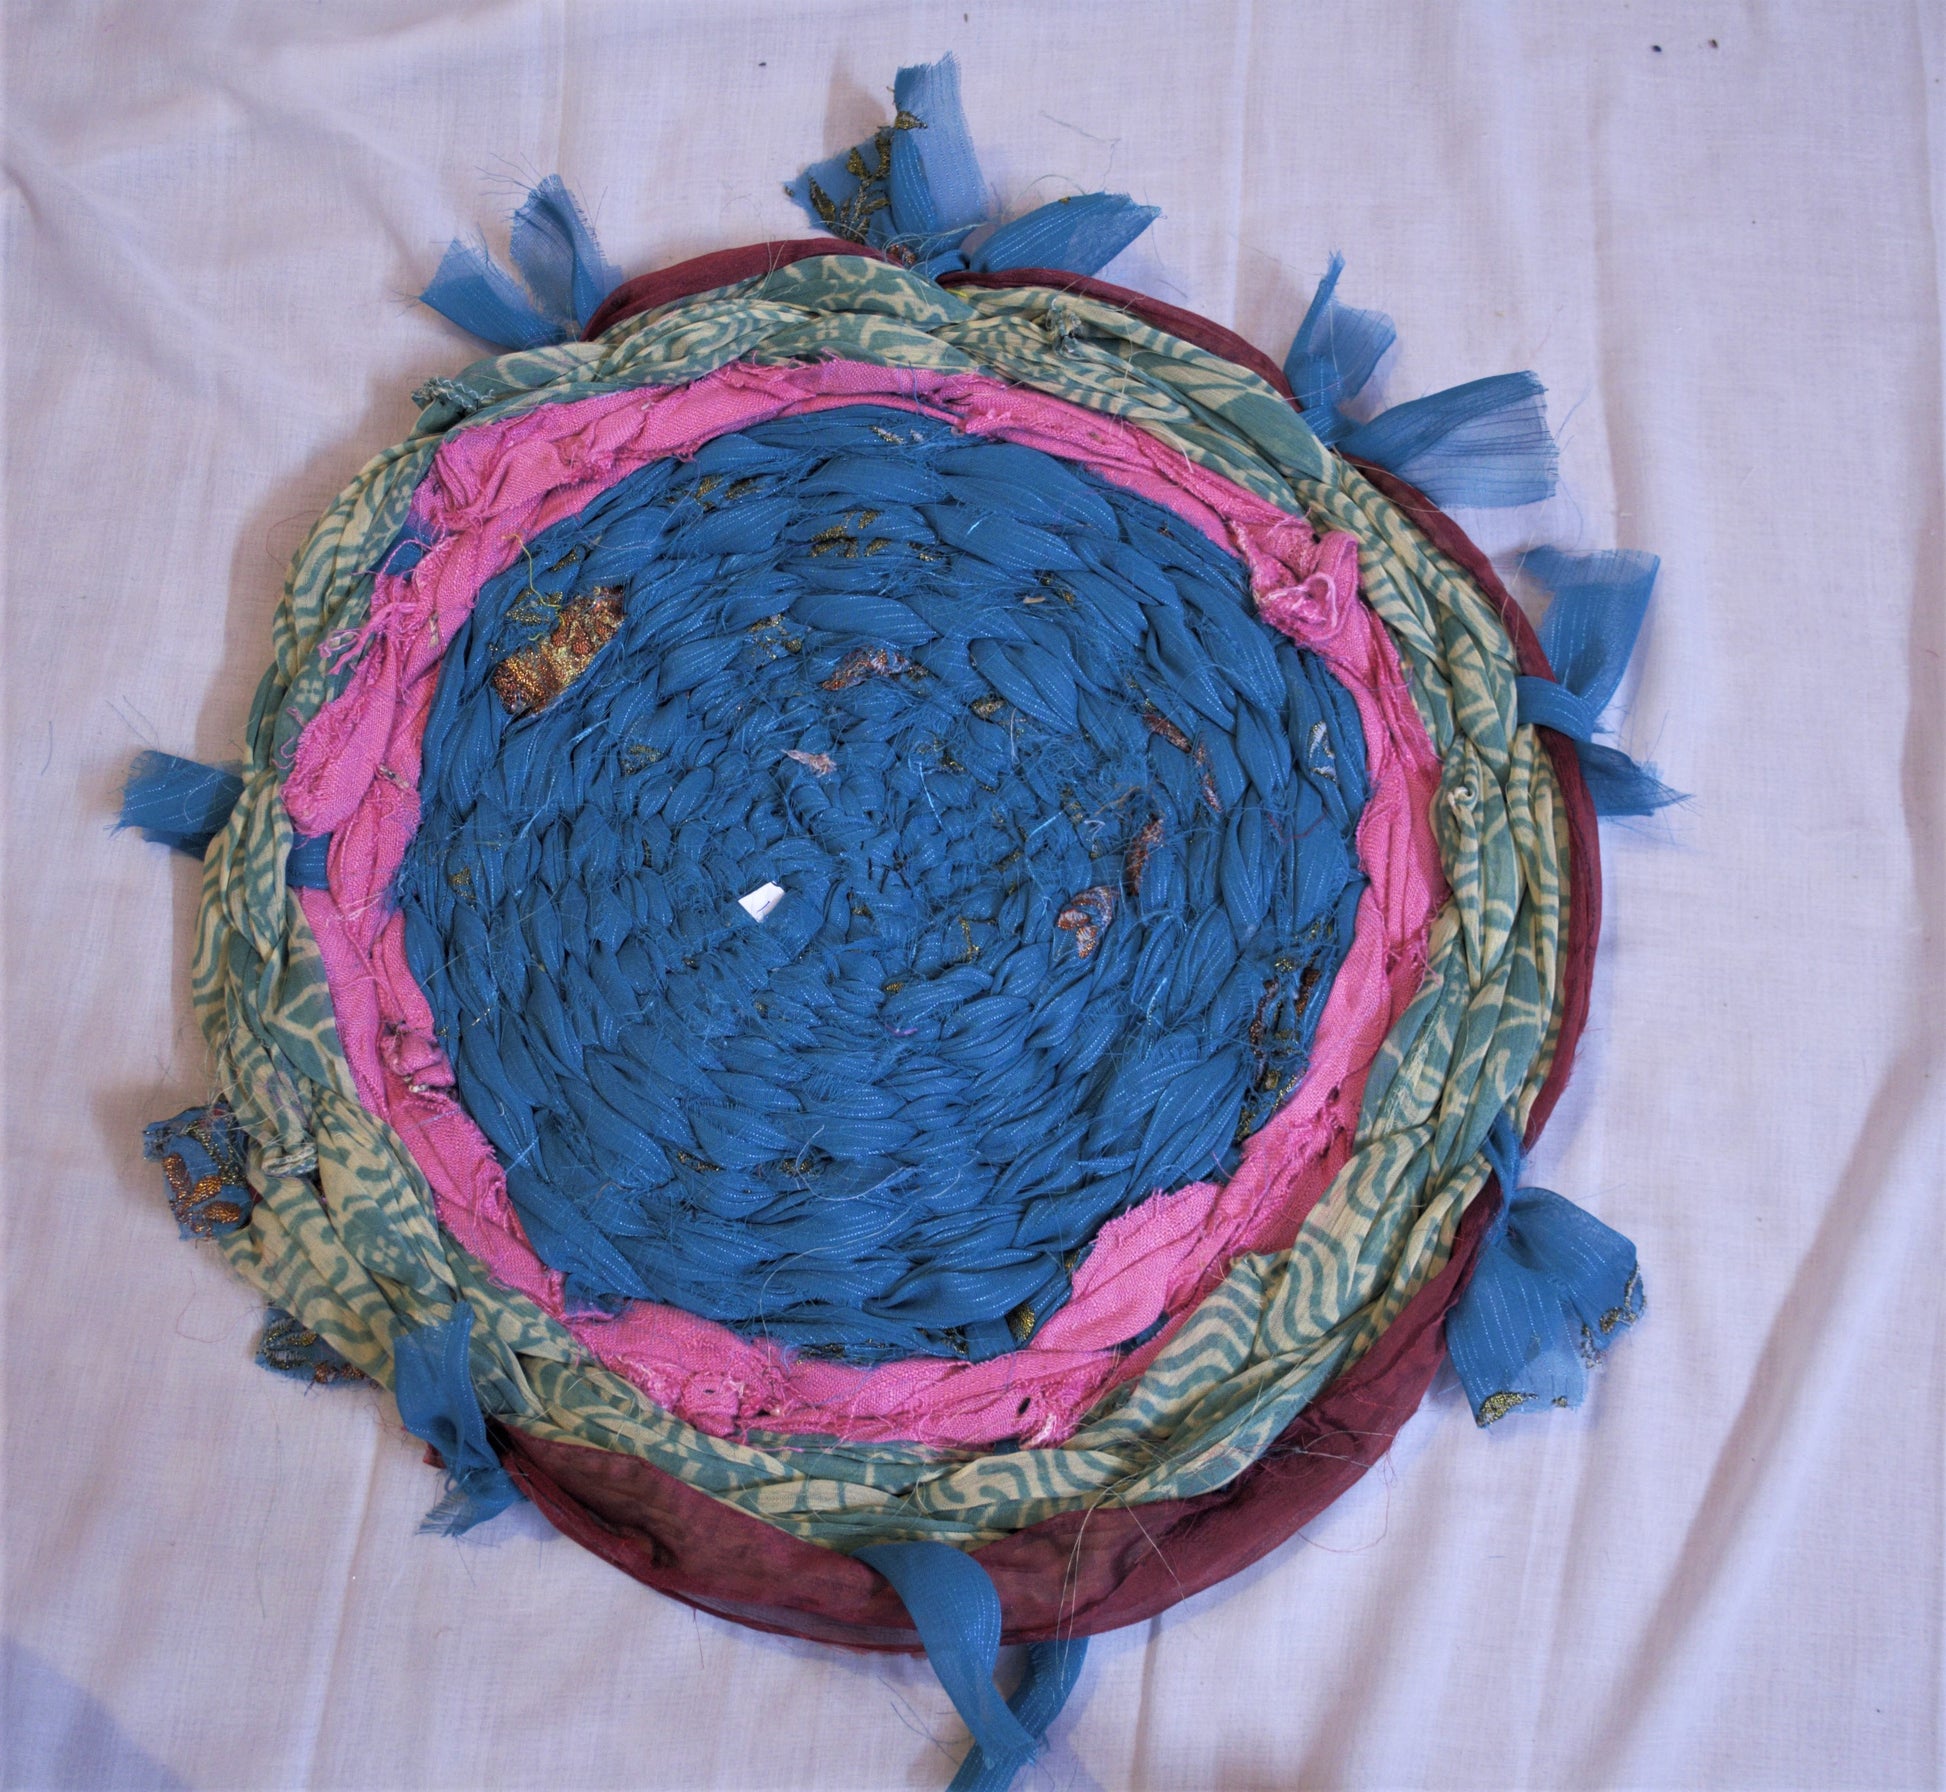 Recycled Handmade Round Asani and Foot Mat in Blue Color Pattern - GlitterGleam